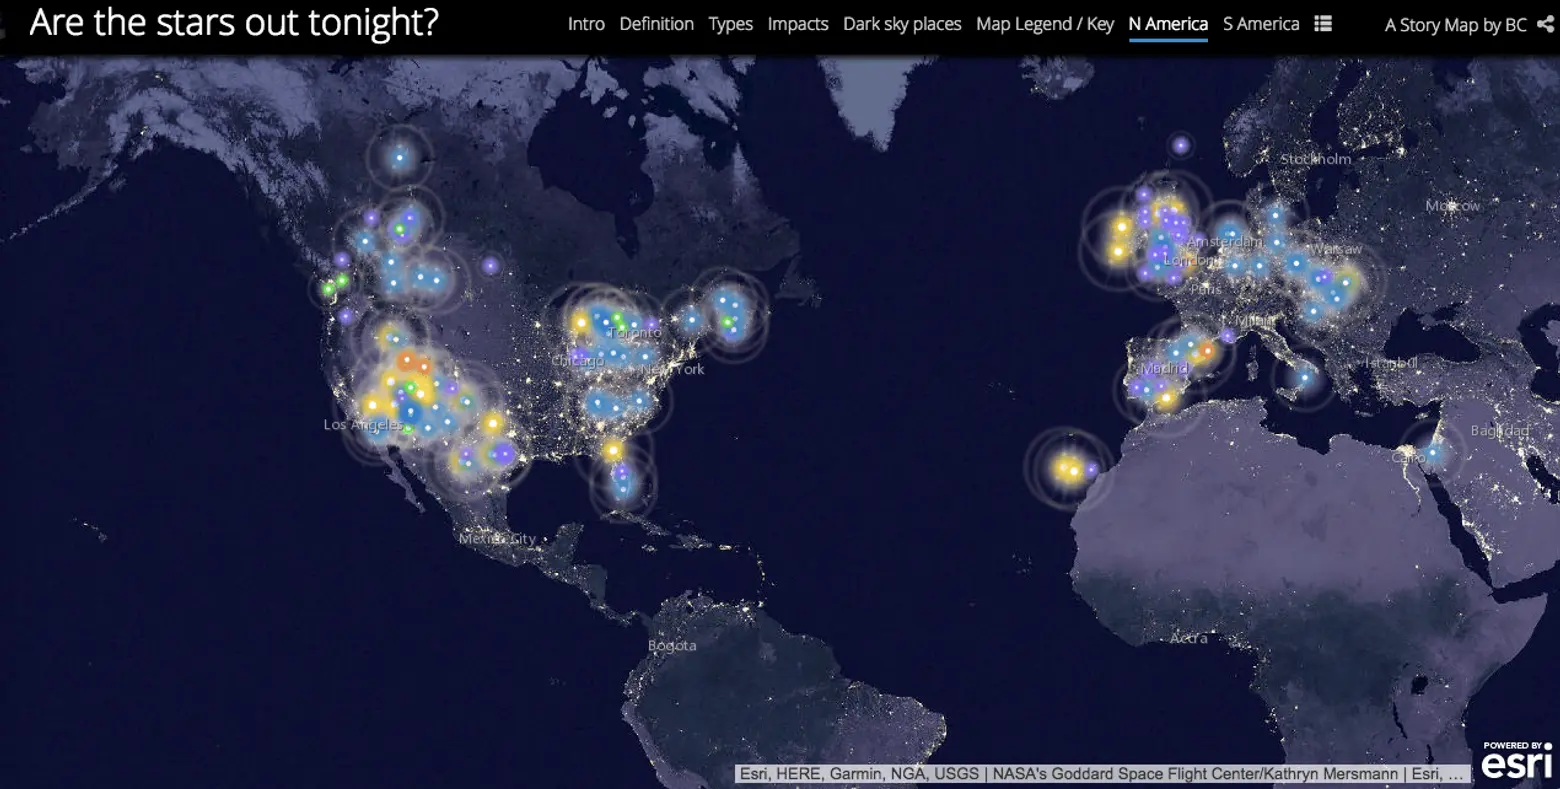 Tired of NYC’s light pollution? Use this map to find ‘dark sky’ escapes